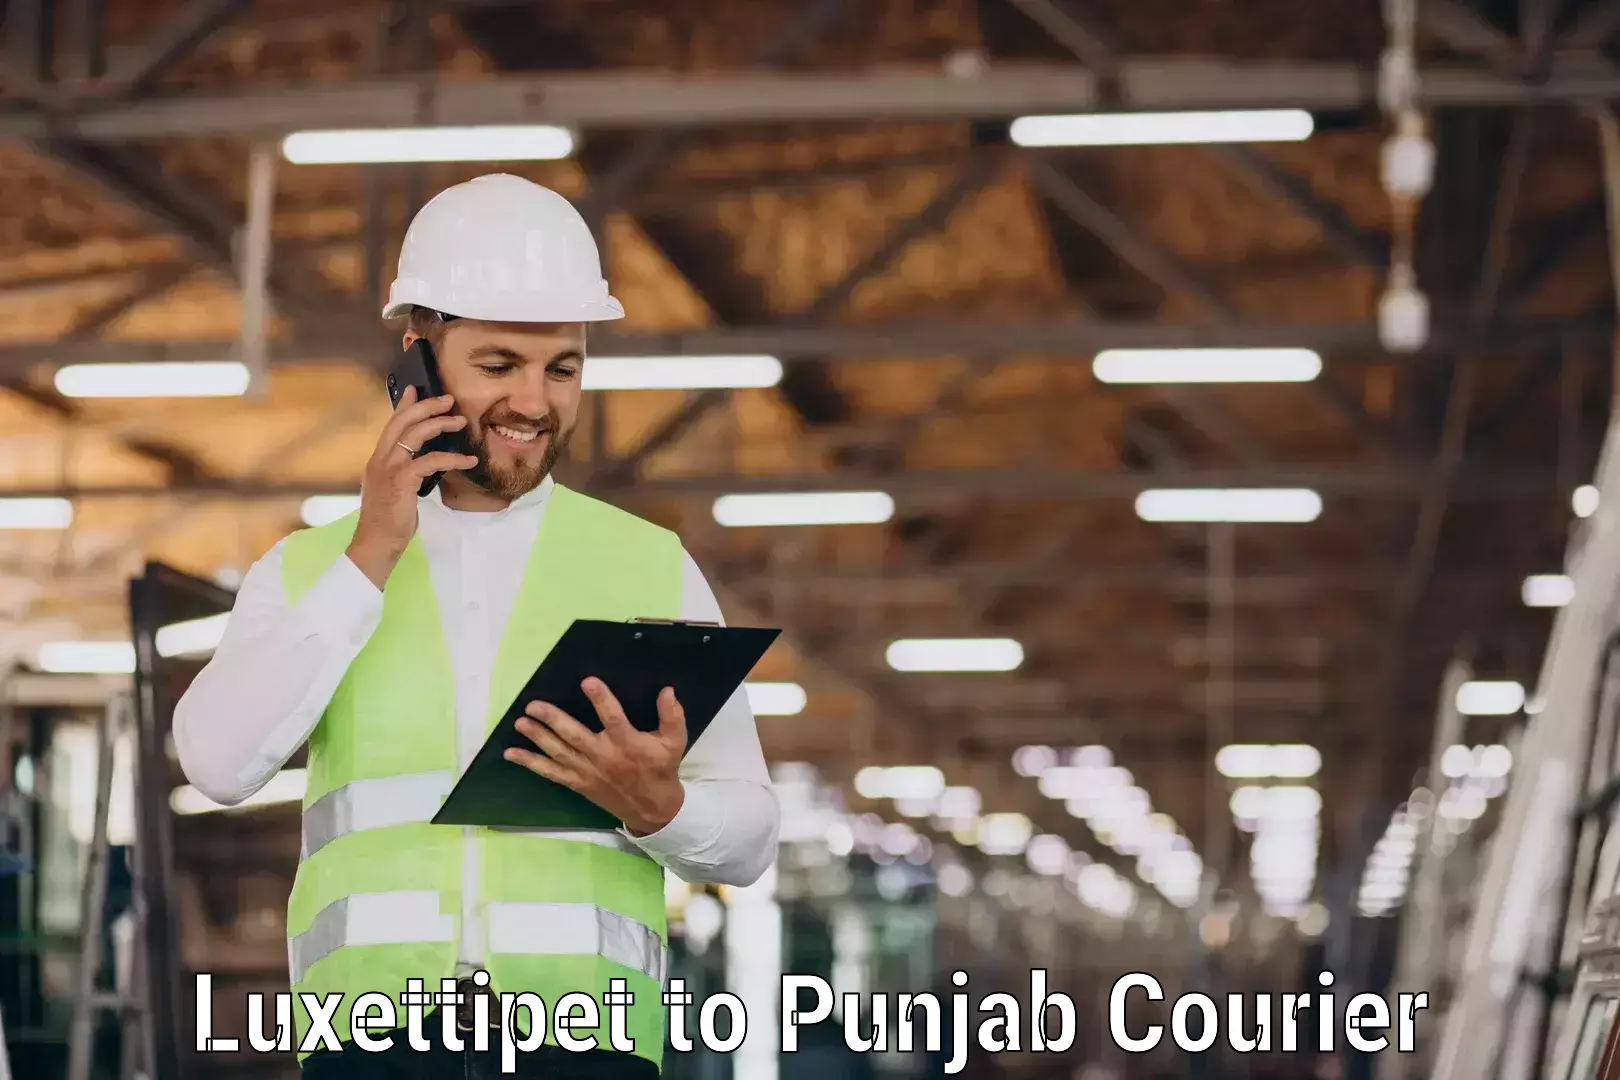 Overnight delivery services Luxettipet to Punjab